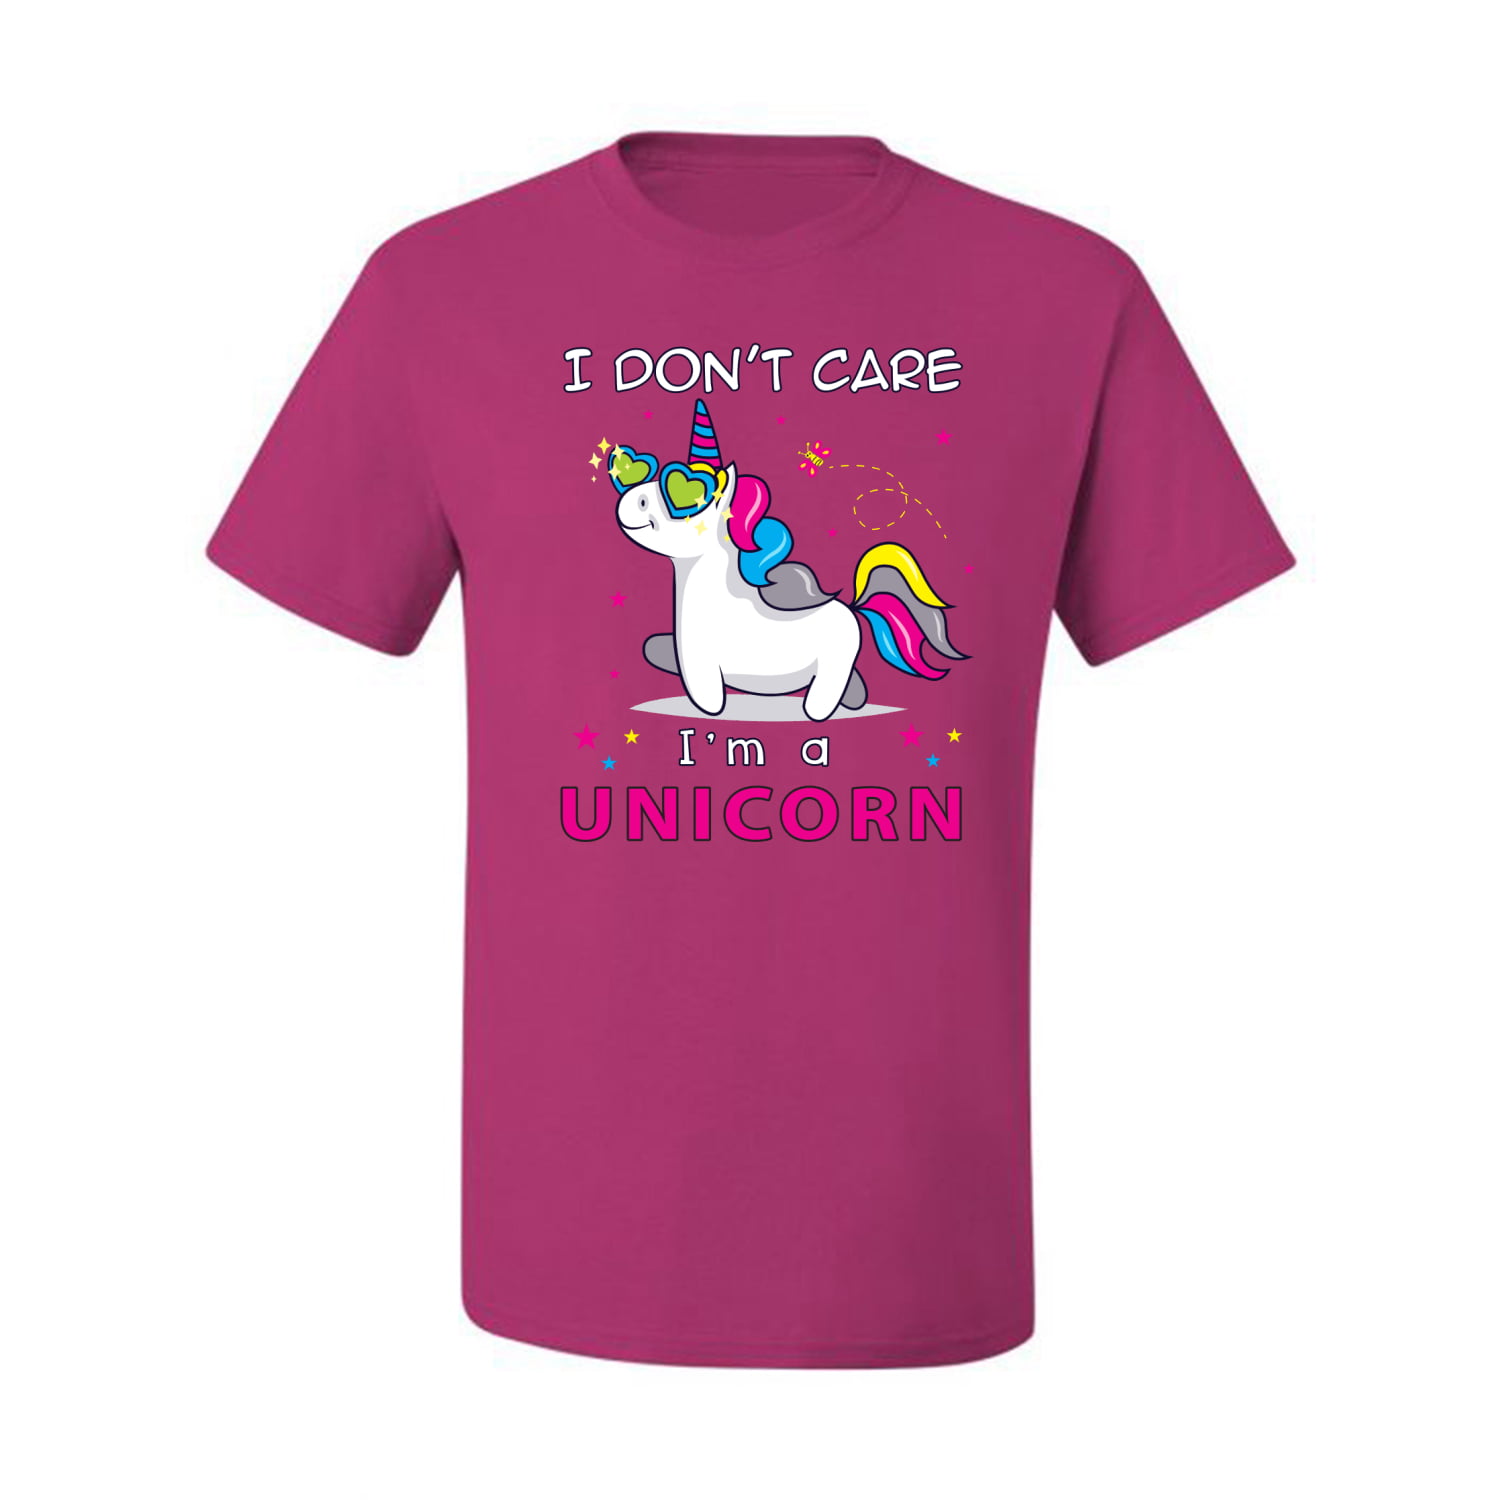 Unicorns Don't Worry About Getting Old Worry About Thinking Old Shirt Unicorn Lover Shirt Unicorn Gift Shirt Funny Unicorn Shirt